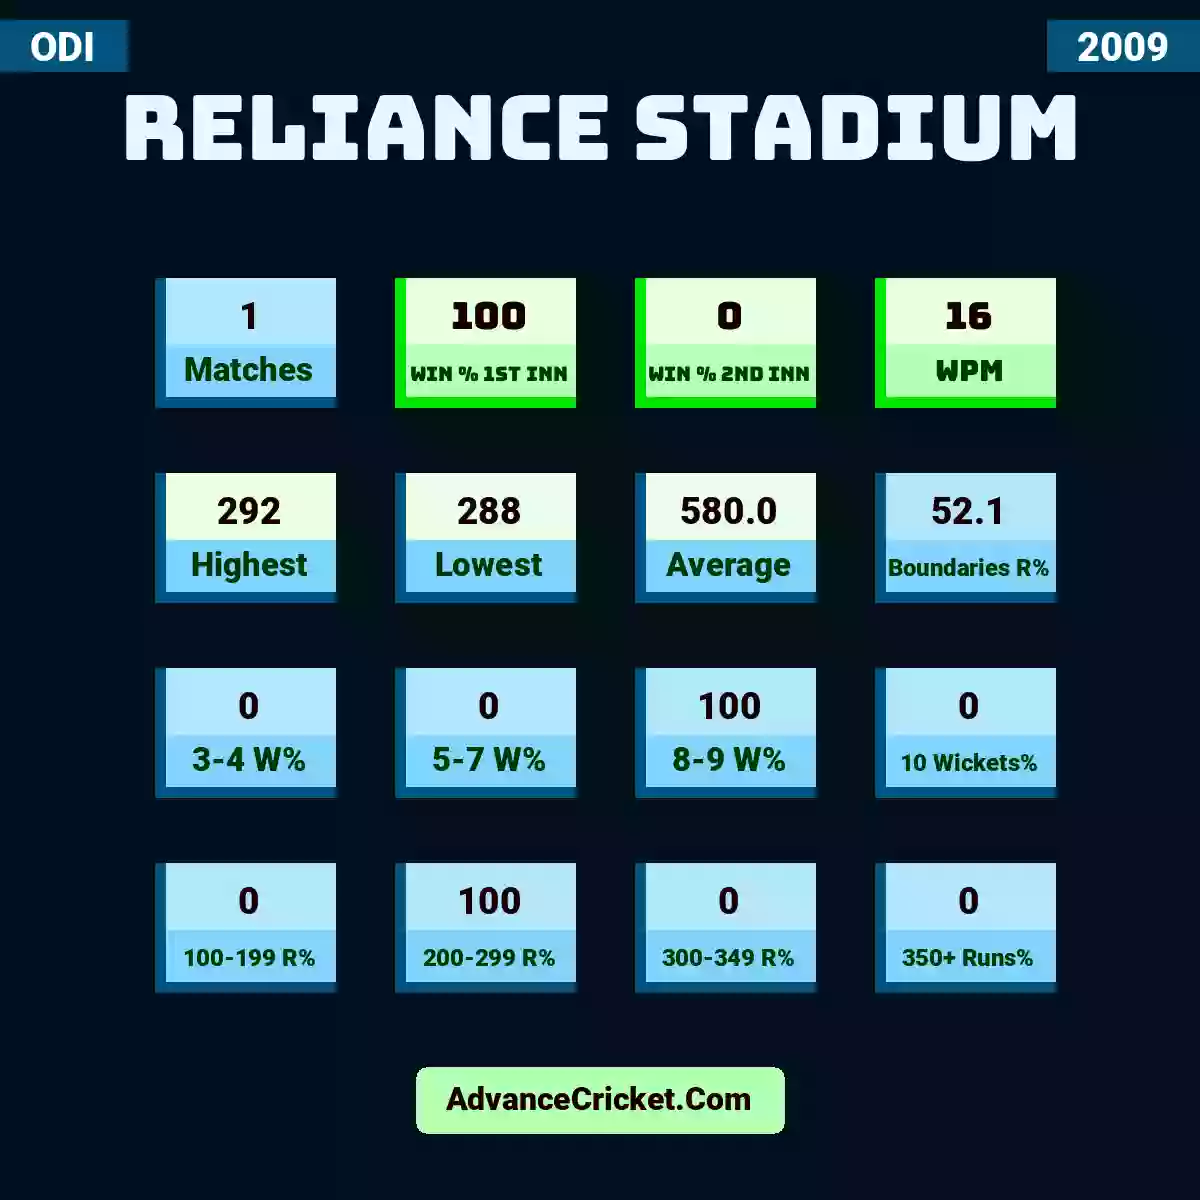 Image showing Reliance Stadium with Matches: 1, Win % 1st Inn: 100, Win % 2nd Inn: 0, WPM: 16, Highest: 292, Lowest: 288, Average: 580.0, Boundaries R%: 52.1, 3-4 W%: 0, 5-7 W%: 0, 8-9 W%: 100, 10 Wickets%: 0, 100-199 R%: 0, 200-299 R%: 100, 300-349 R%: 0, 350+ Runs%: 0.